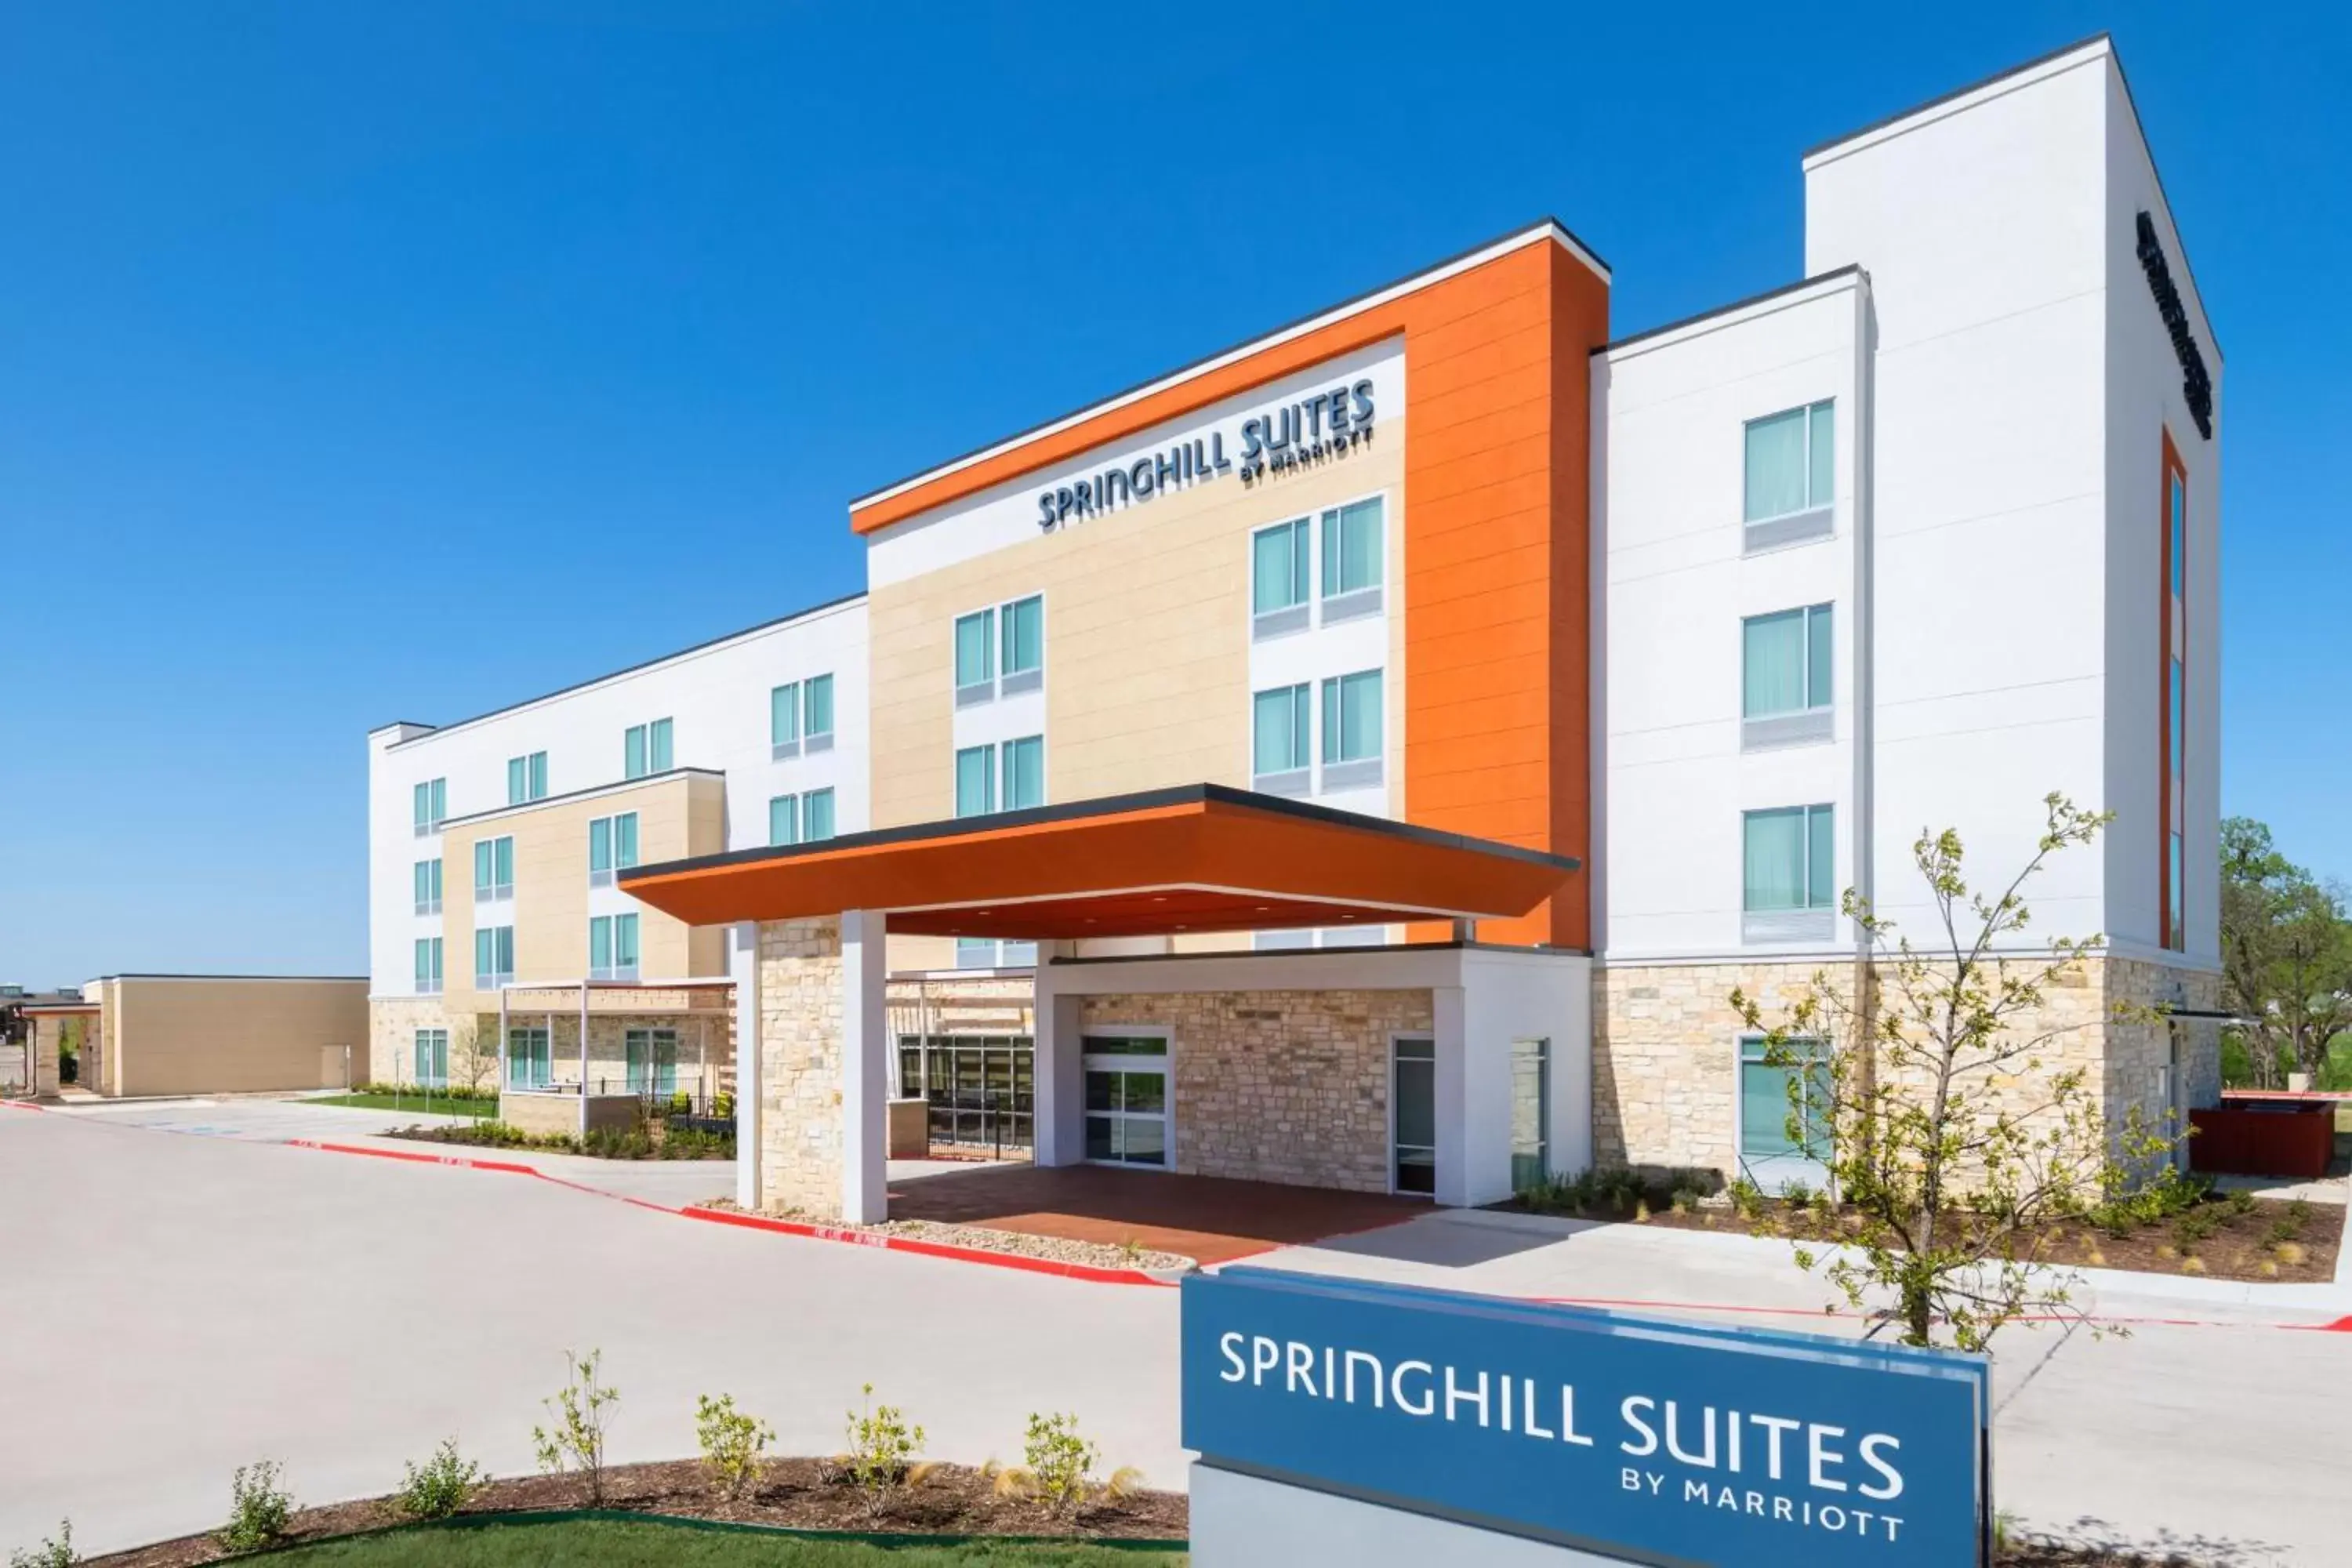 Property Building in SpringHill Suites by Marriott Weatherford Willow Park